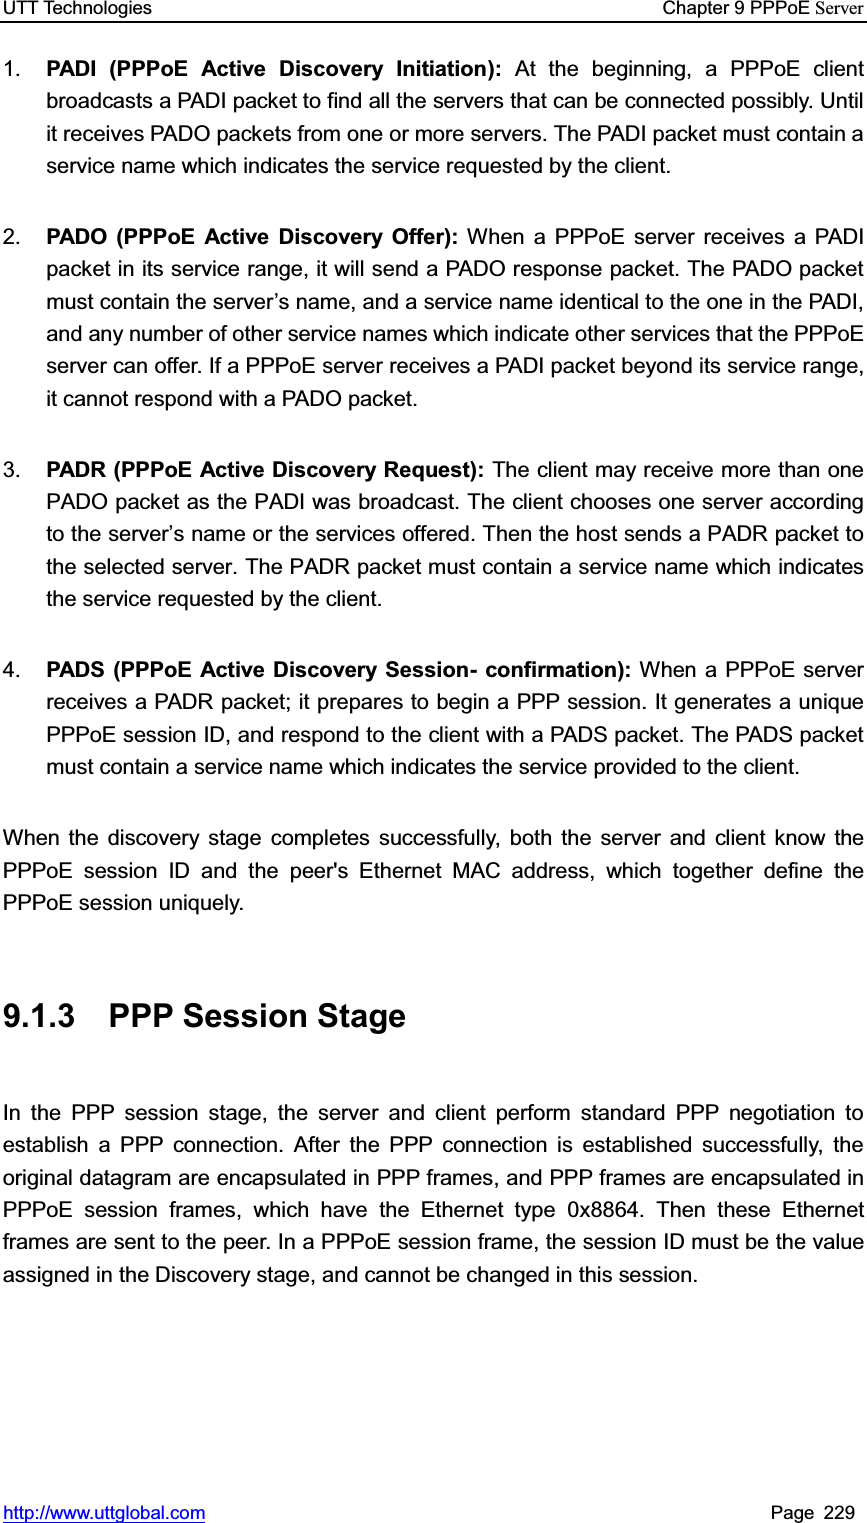 UTT Technologies    Chapter 9 PPPoE Serverhttp://www.uttglobal.com Page 229 1.  PADI (PPPoE Active Discovery Initiation): At the beginning, a PPPoE client broadcasts a PADI packet to find all the servers that can be connected possibly. Until it receives PADO packets from one or more servers. The PADI packet must contain a service name which indicates the service requested by the client. 2.  PADO (PPPoE Active Discovery Offer): When a PPPoE server receives a PADI packet in its service range, it will send a PADO response packet. The PADO packet must contain the server¶s name, and a service name identical to the one in the PADI, and any number of other service names which indicate other services that the PPPoE server can offer. If a PPPoE server receives a PADI packet beyond its service range, it cannot respond with a PADO packet.   3.  PADR (PPPoE Active Discovery Request): The client may receive more than one PADO packet as the PADI was broadcast. The client chooses one server according to the server¶s name or the services offered. Then the host sends a PADR packet to the selected server. The PADR packet must contain a service name which indicates the service requested by the client. 4.  PADS (PPPoE Active Discovery Session- confirmation): When a PPPoE server receives a PADR packet; it prepares to begin a PPP session. It generates a unique PPPoE session ID, and respond to the client with a PADS packet. The PADS packet must contain a service name which indicates the service provided to the client.   When the discovery stage completes successfully, both the server and client know the PPPoE session ID and the peer&apos;s Ethernet MAC address, which together define the PPPoE session uniquely. 9.1.3 PPP Session Stage In the PPP session stage, the server and client perform standard PPP negotiation to establish a PPP connection. After the PPP connection is established successfully, the original datagram are encapsulated in PPP frames, and PPP frames are encapsulated in PPPoE session frames, which have the Ethernet type 0x8864. Then these Ethernet frames are sent to the peer. In a PPPoE session frame, the session ID must be the value assigned in the Discovery stage, and cannot be changed in this session.   